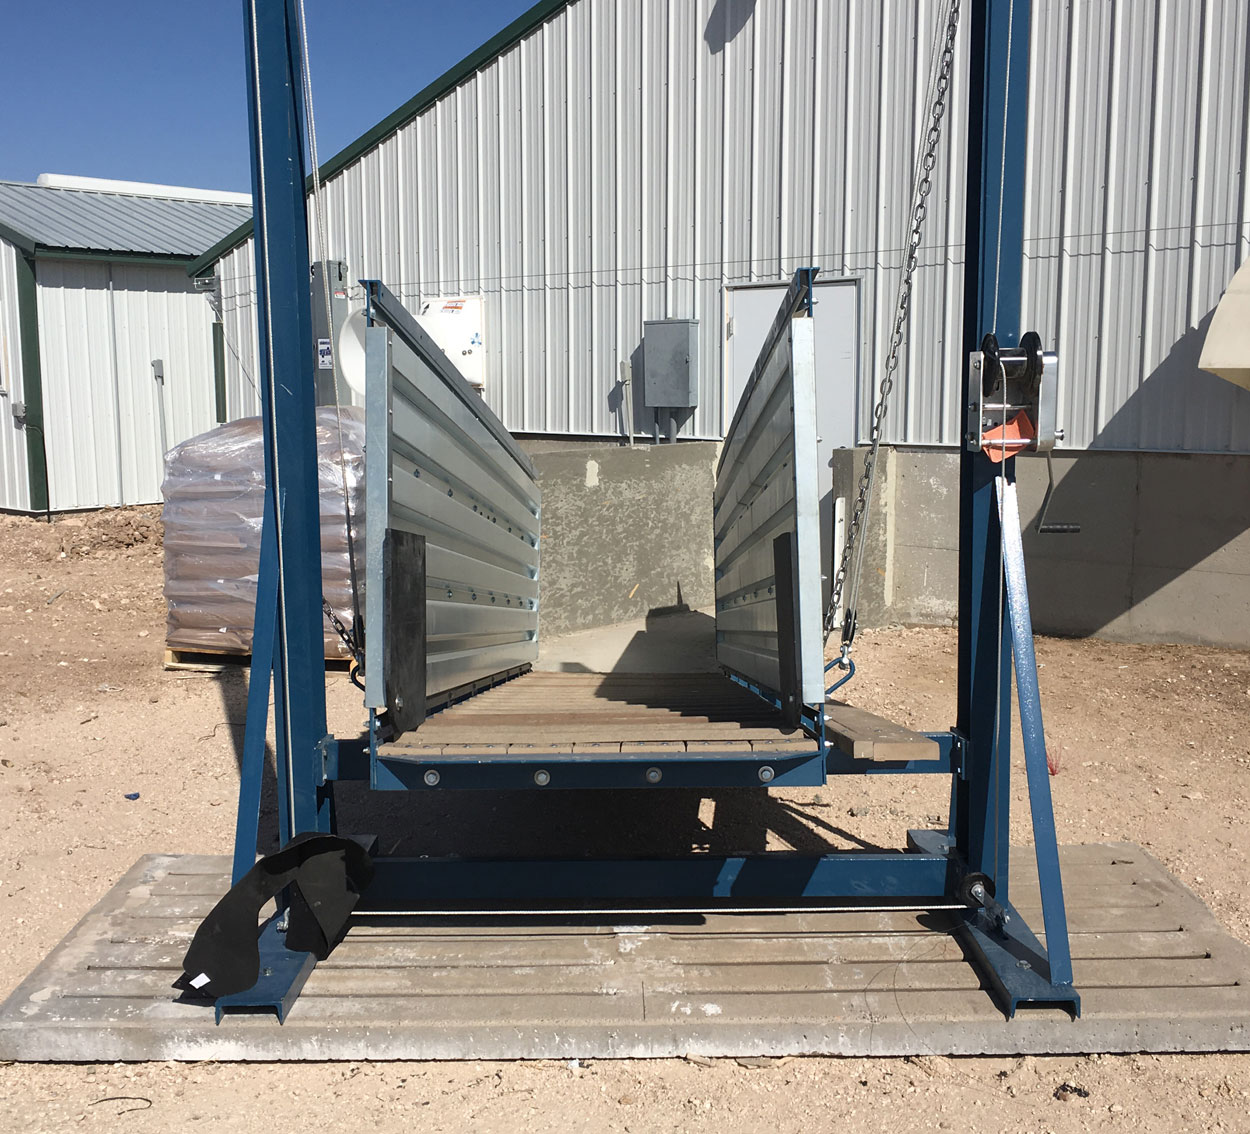 Loading crew personnel can navigate the chute and control pig flow using the walk board mounted on the exterior of all outside walkway chute models.